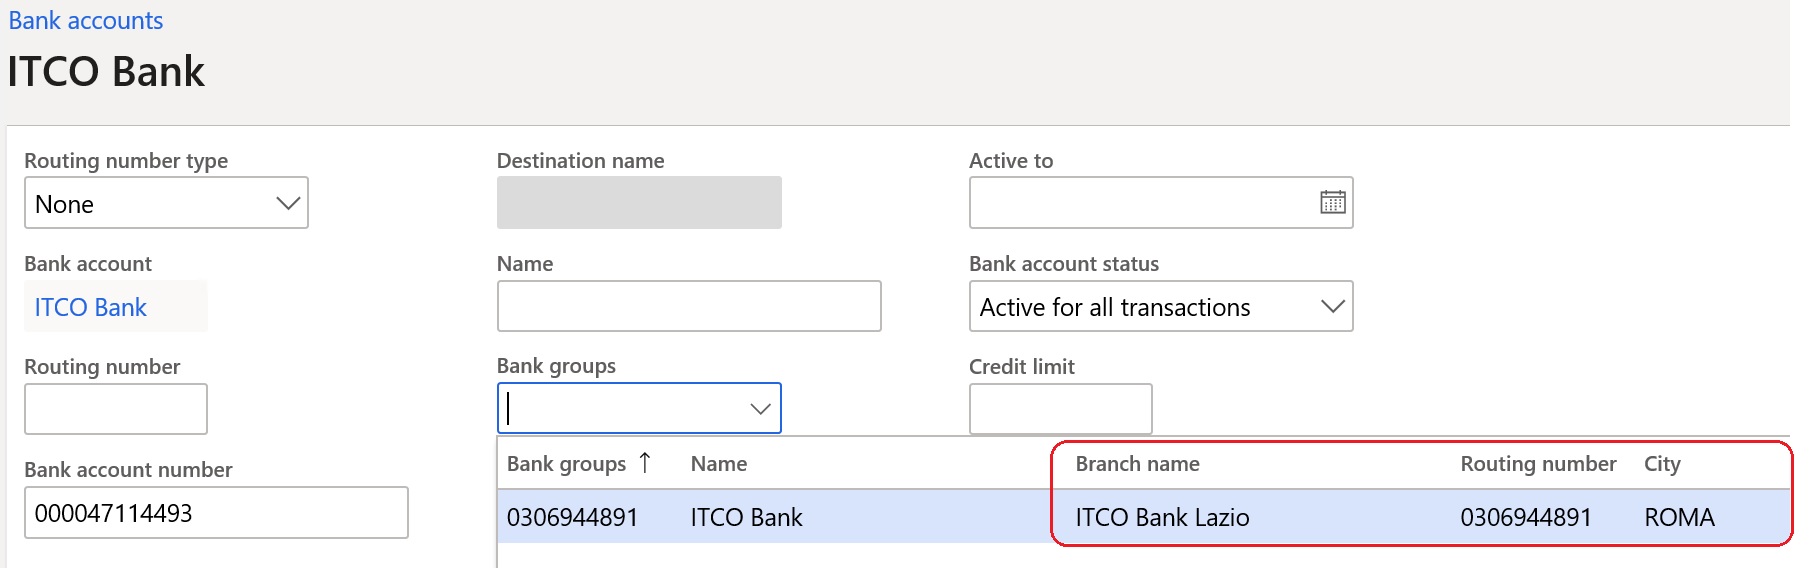 Additional descriptive fields in a bank account setup.